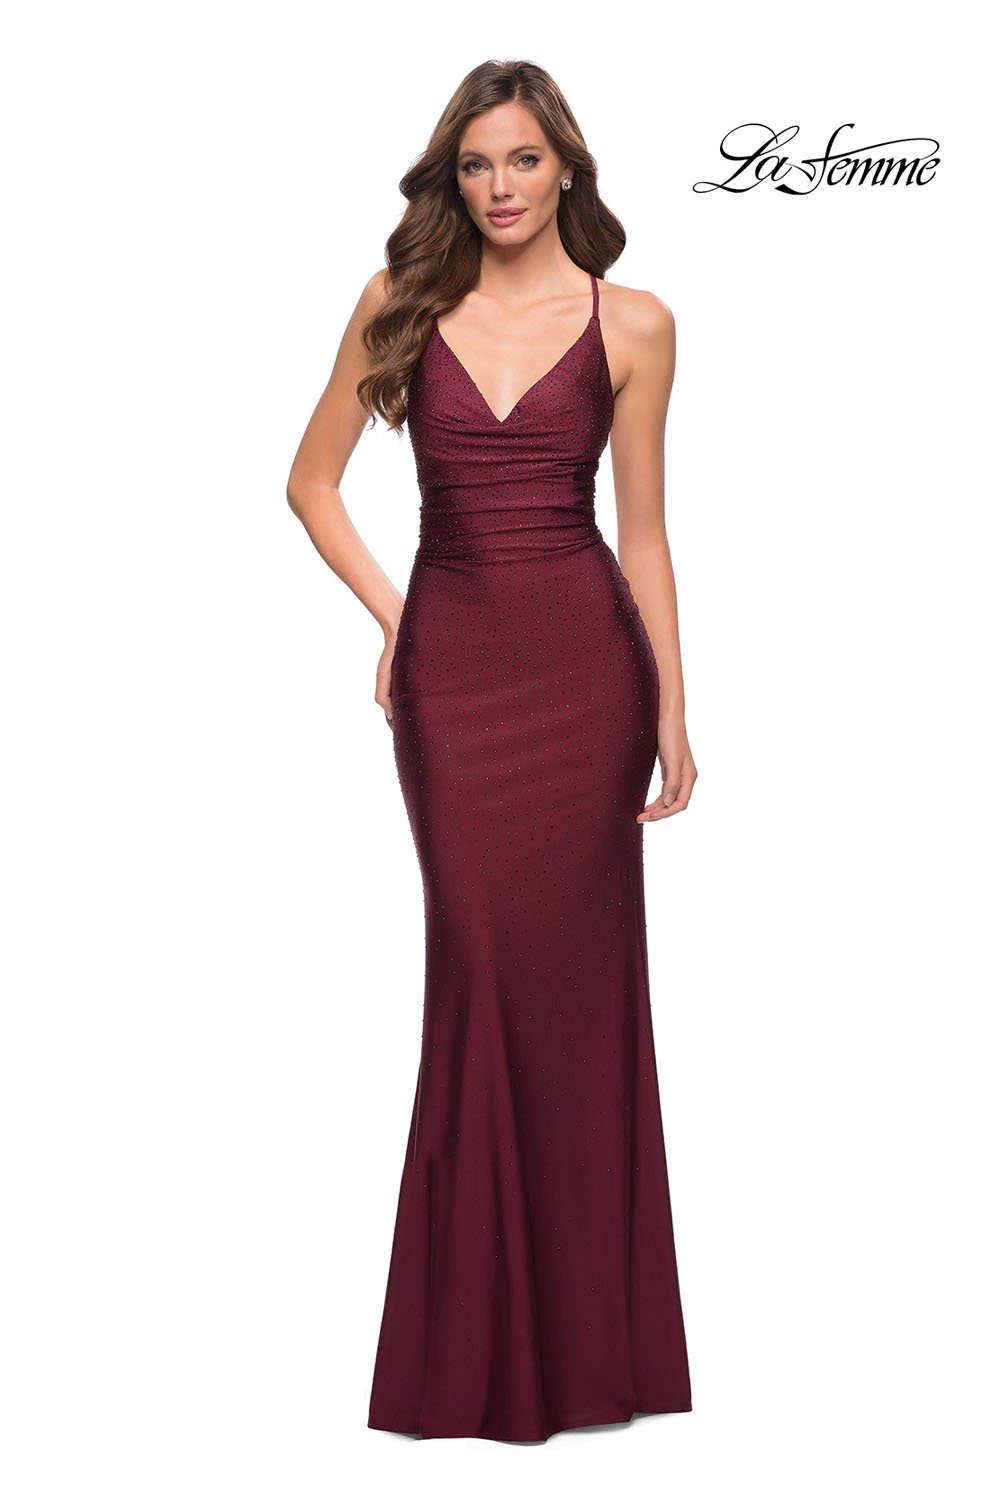 La Femme 29935 dress images in these colors: Black, Dark Berry.